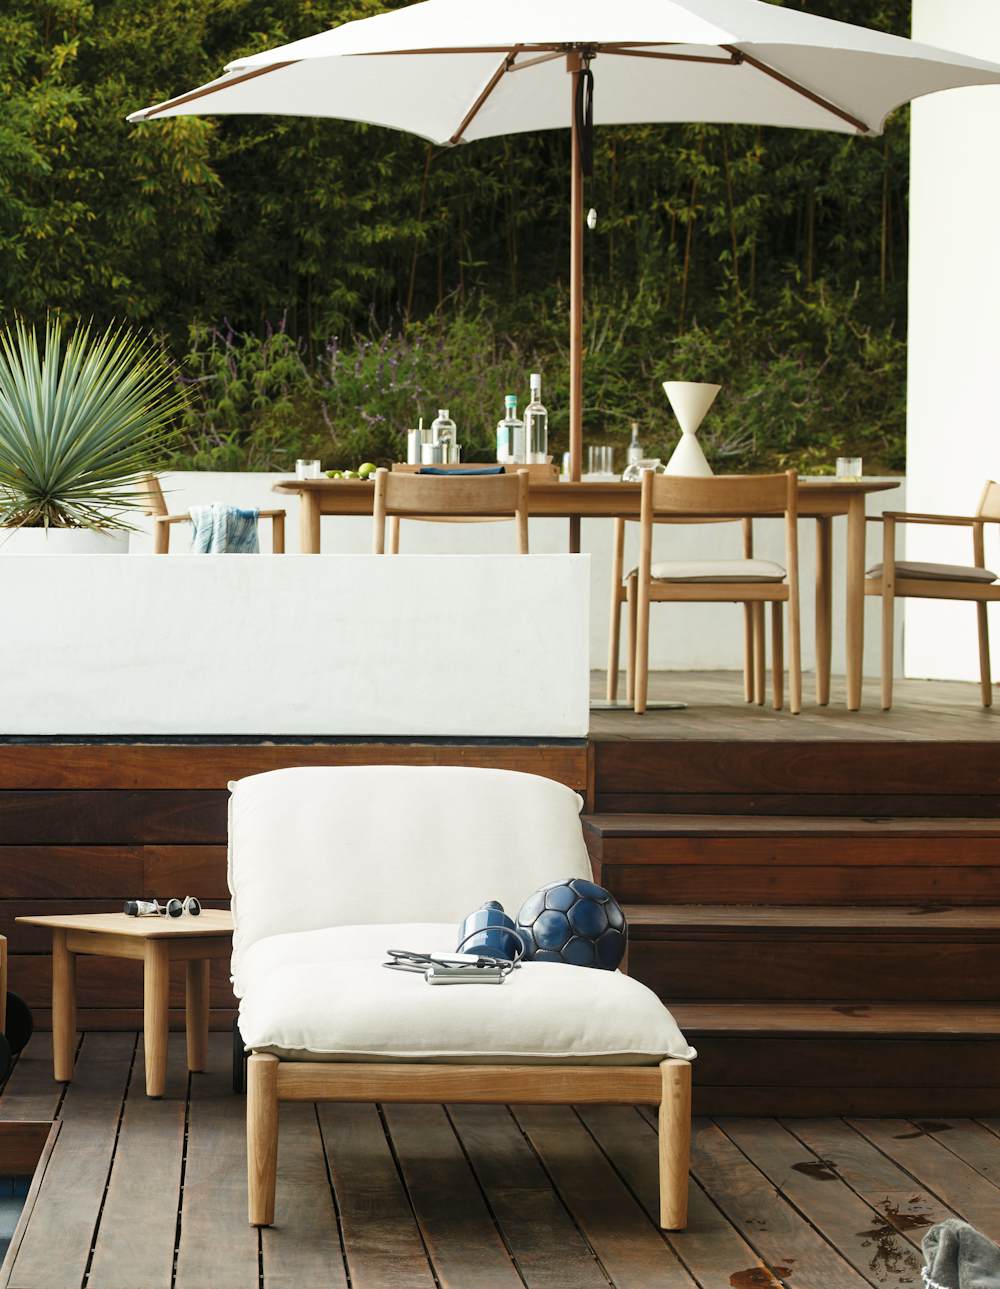 Terassi Chaise, Terassi Dining Table, Terassi Dining Chairs in an outdoor patio setting